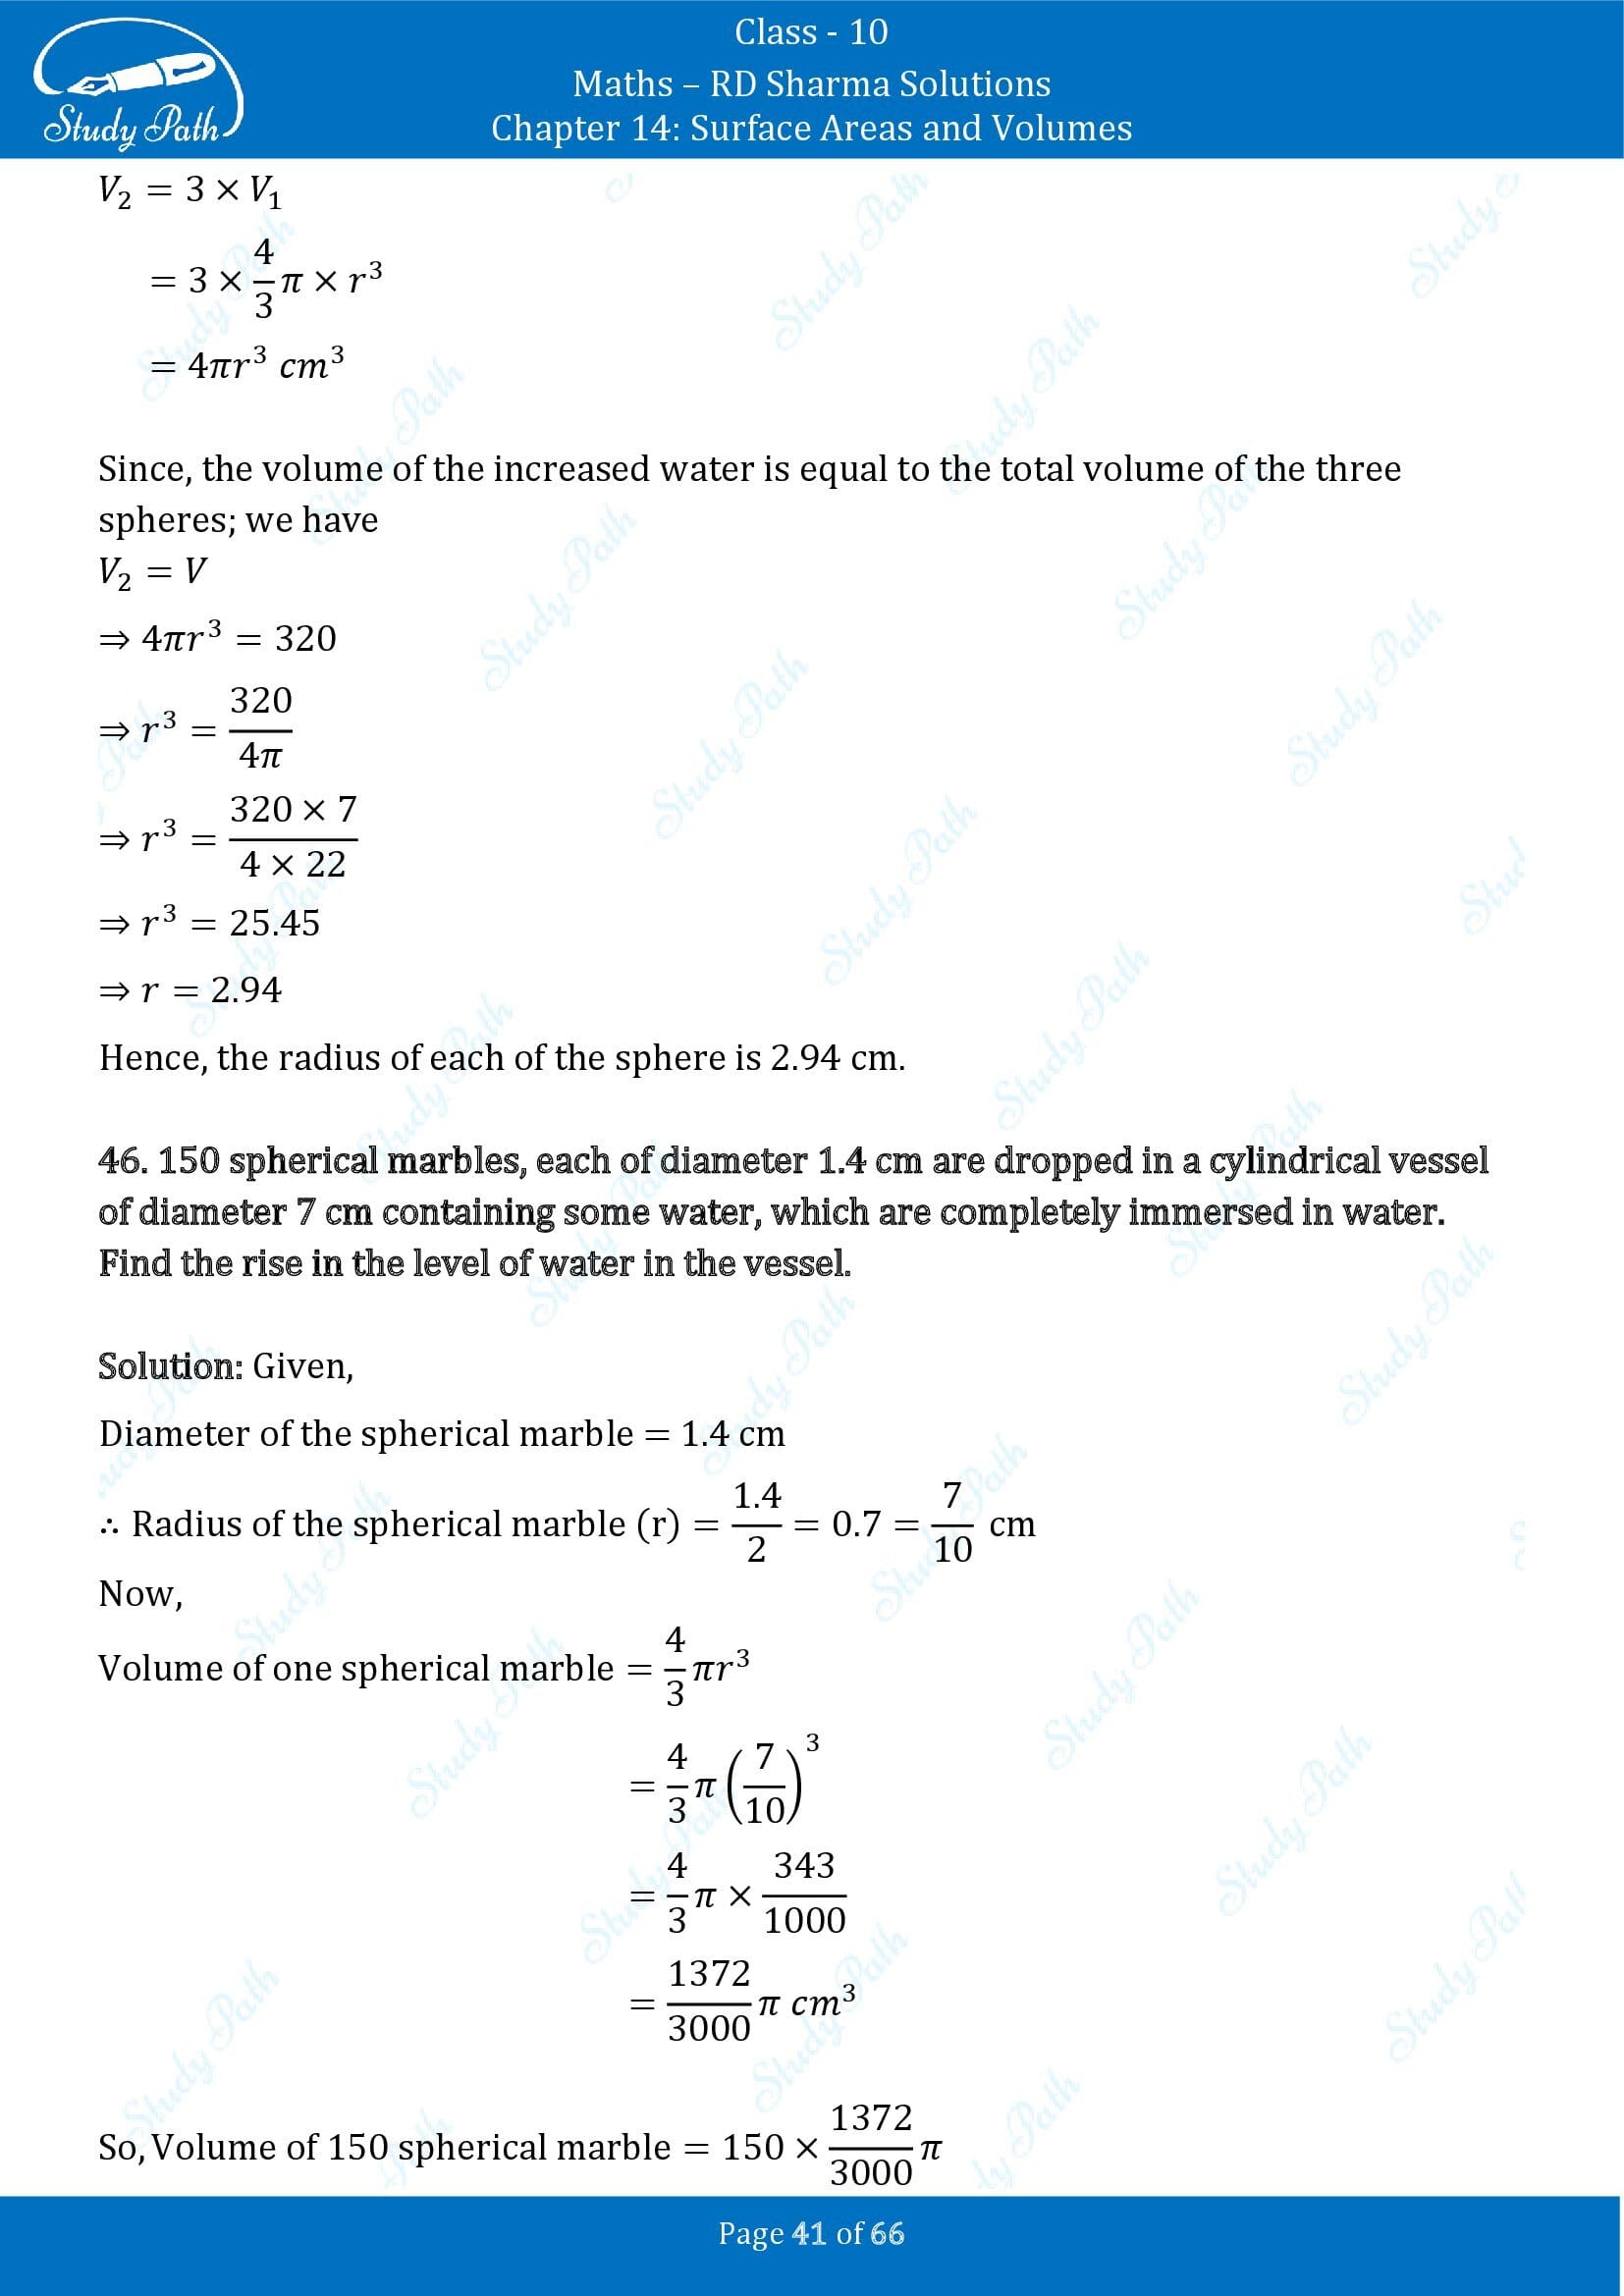 RD Sharma Solutions Class 10 Chapter 14 Surface Areas and Volumes Exercise 14.1 00041